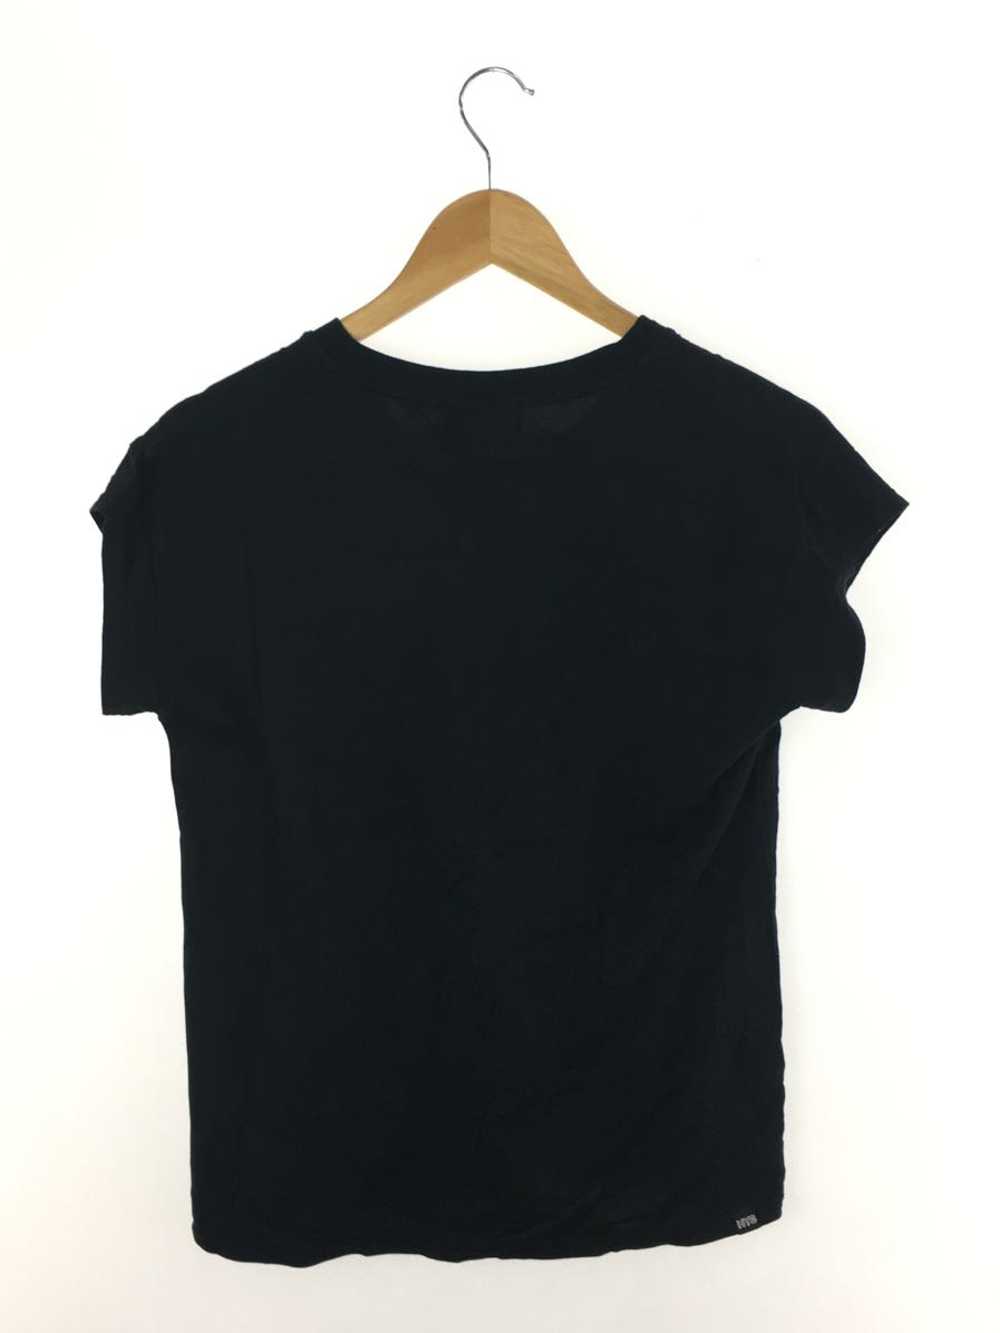 Used Hysteric Glamor T-Shirt/Free/Cotton/Black/01… - image 2